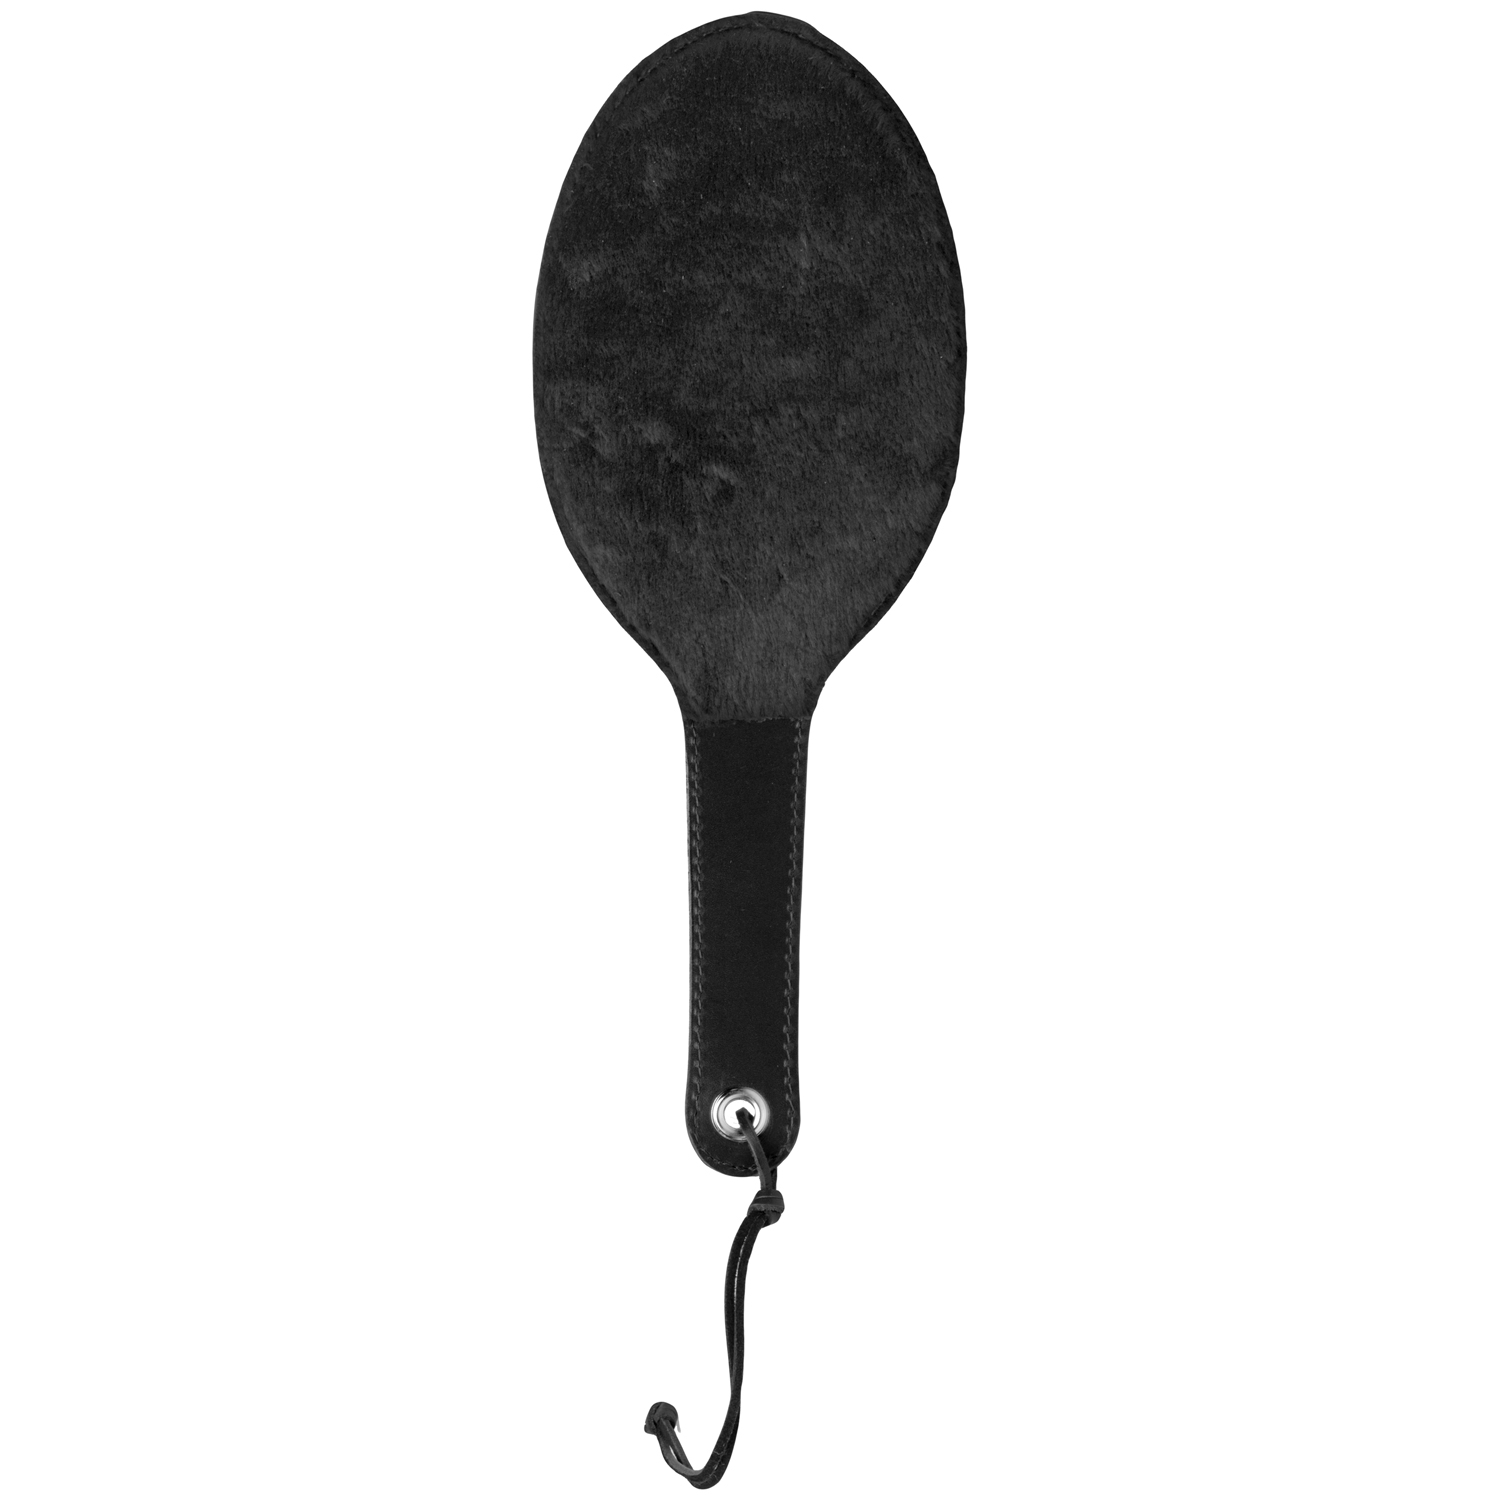 Strict Leather And Fur Round Paddle - Black thumbnail